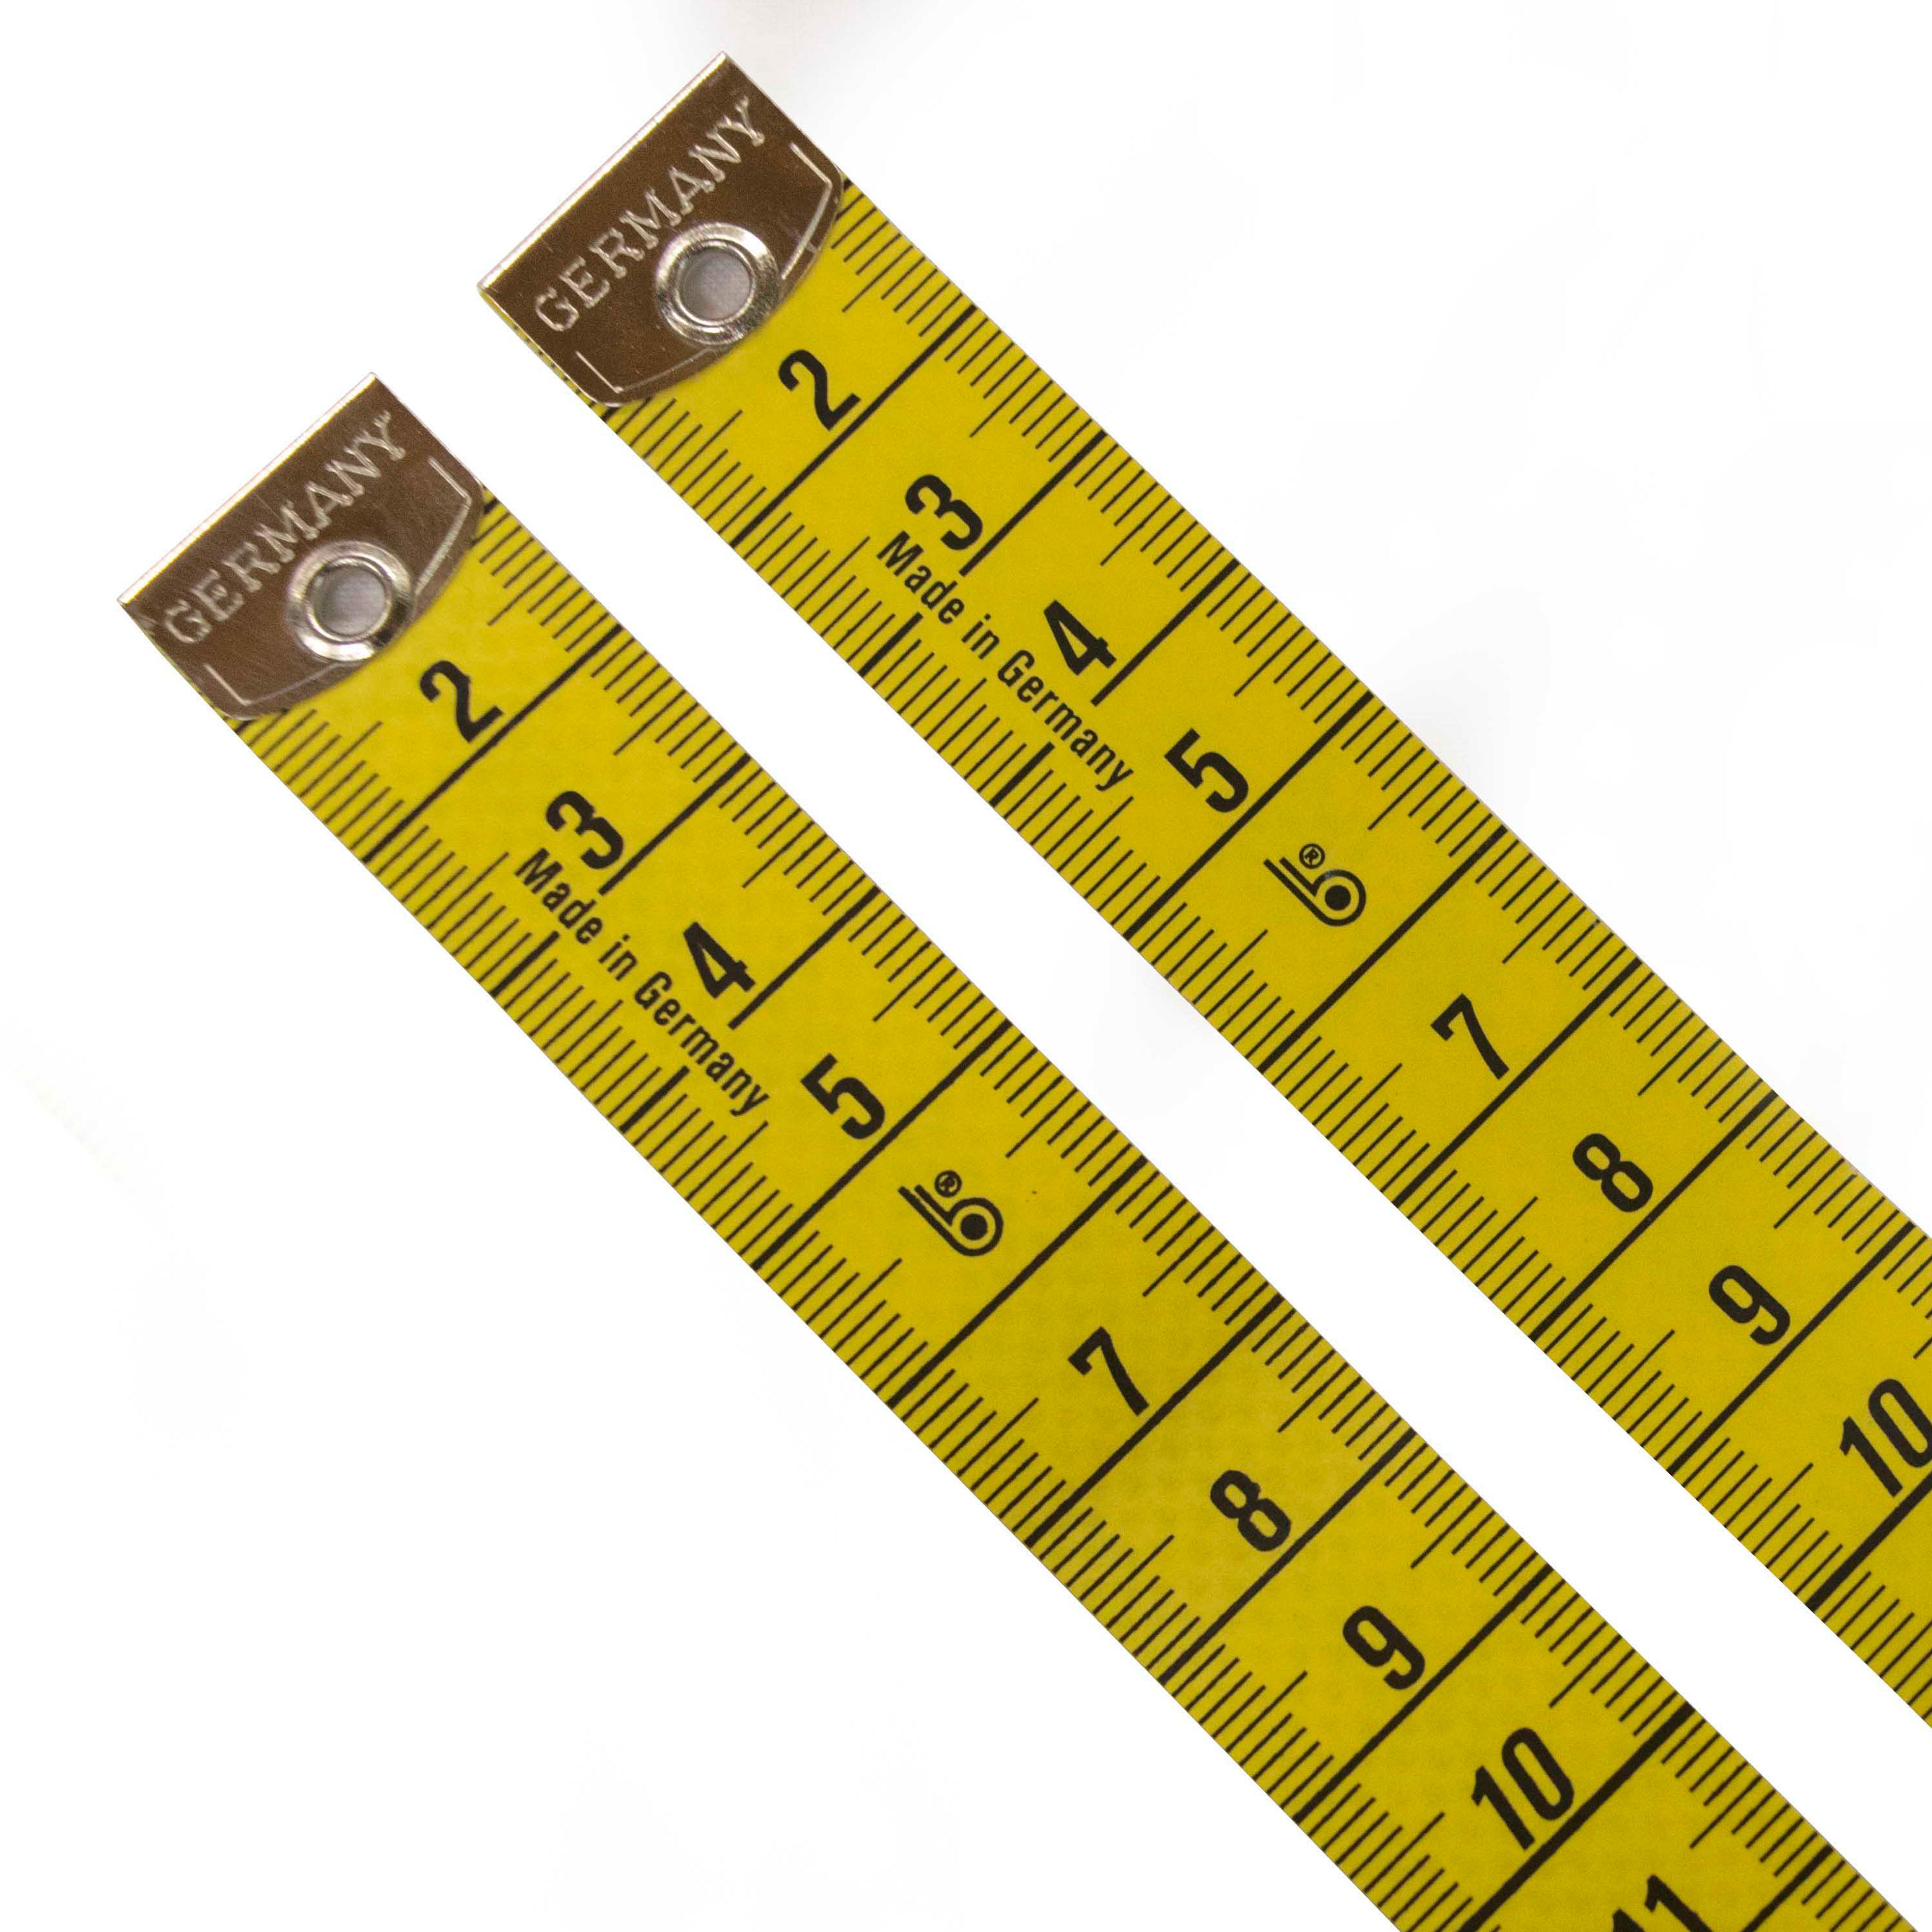  Tape  Measure  Cm  Cm  Tailoring Accessories From Dugdale 